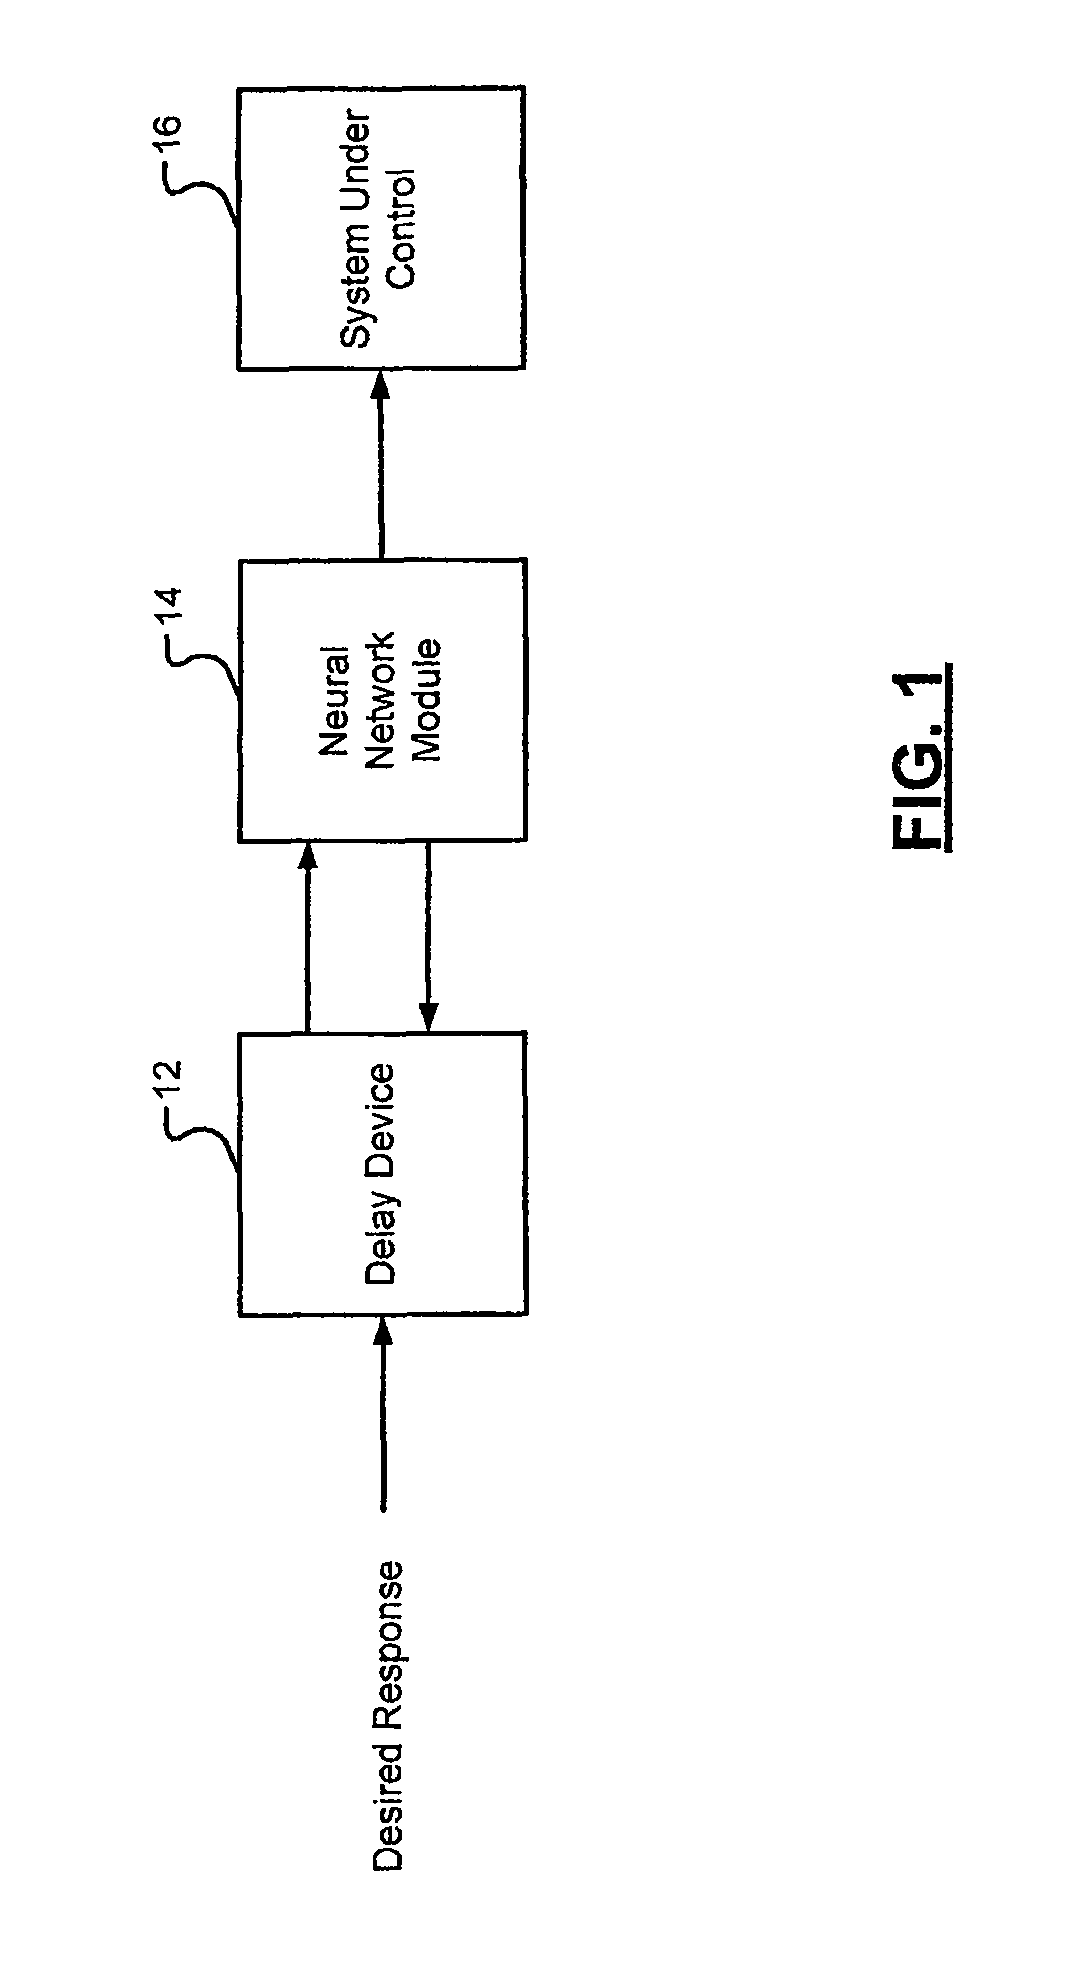 Adaptive neural net feed forward system and method for adaptive control of mechanical systems